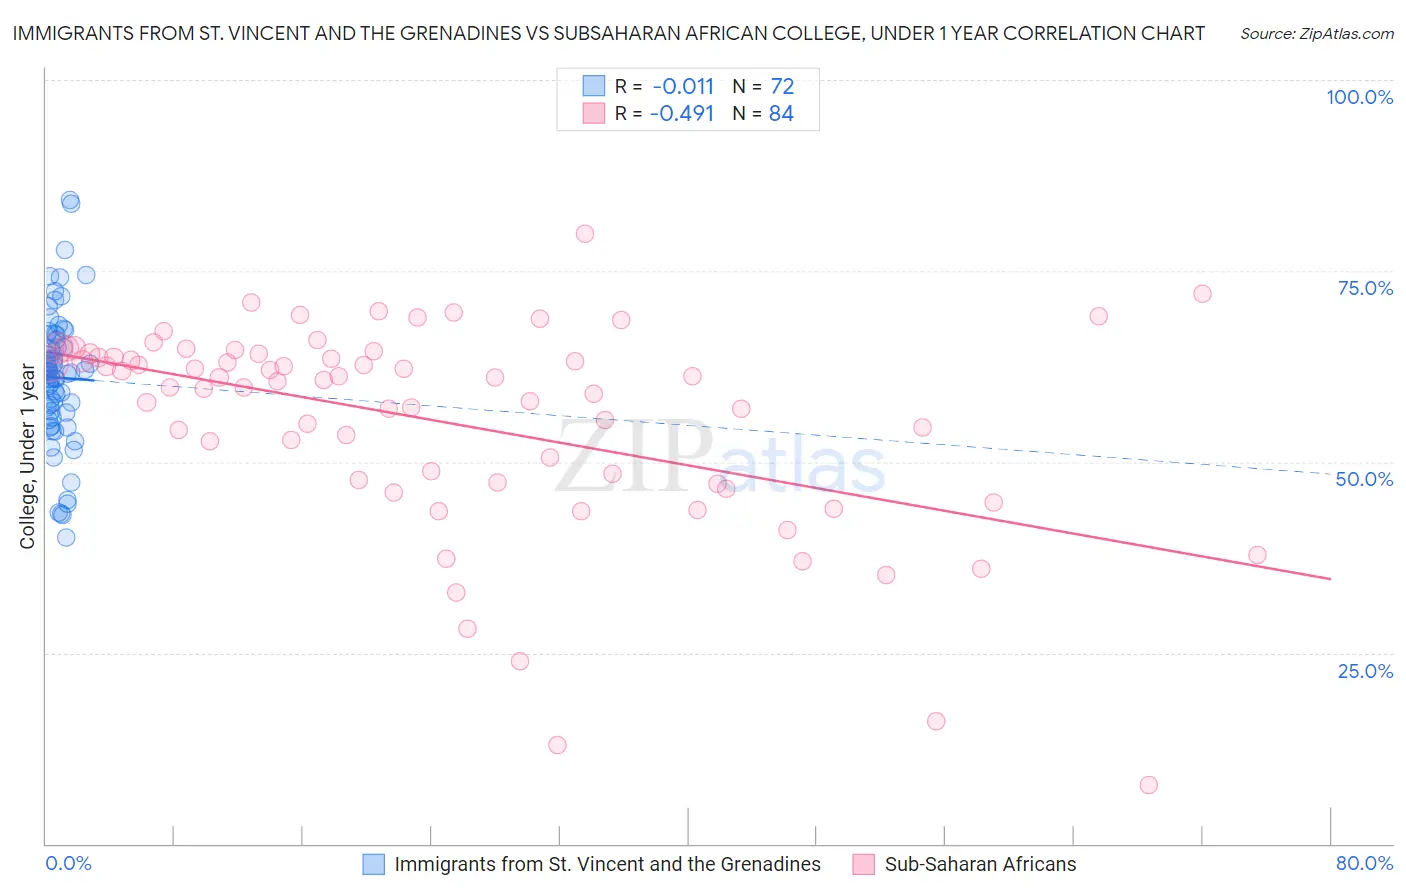 Immigrants from St. Vincent and the Grenadines vs Subsaharan African College, Under 1 year